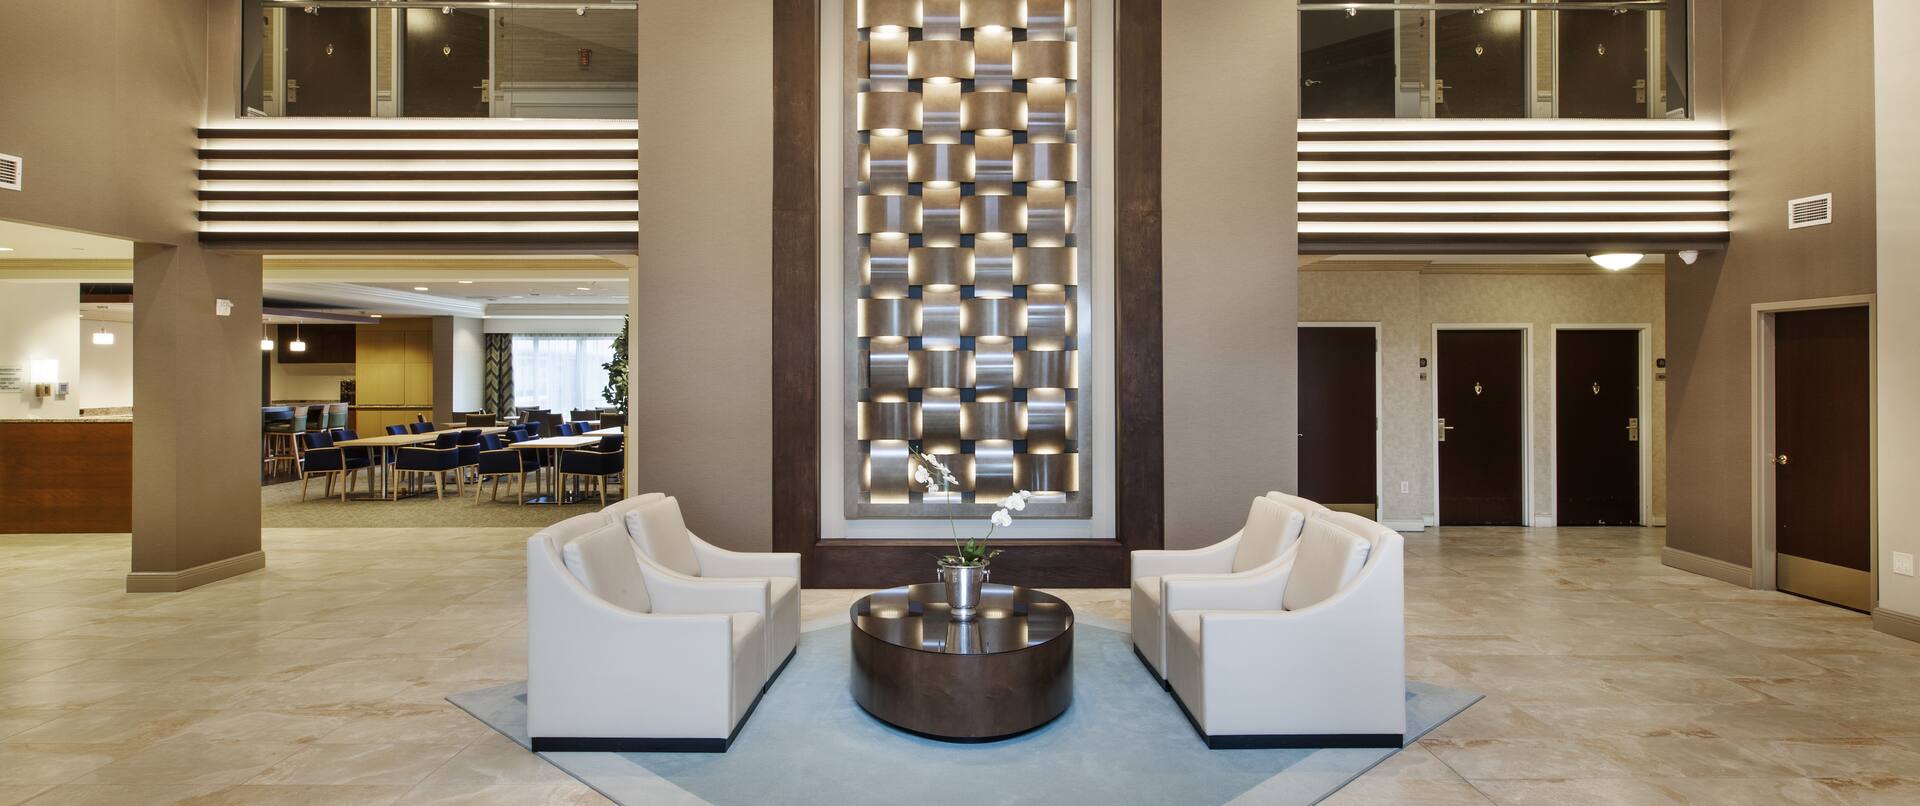 Large Art Feature and Lounge Seating in Main Lobby